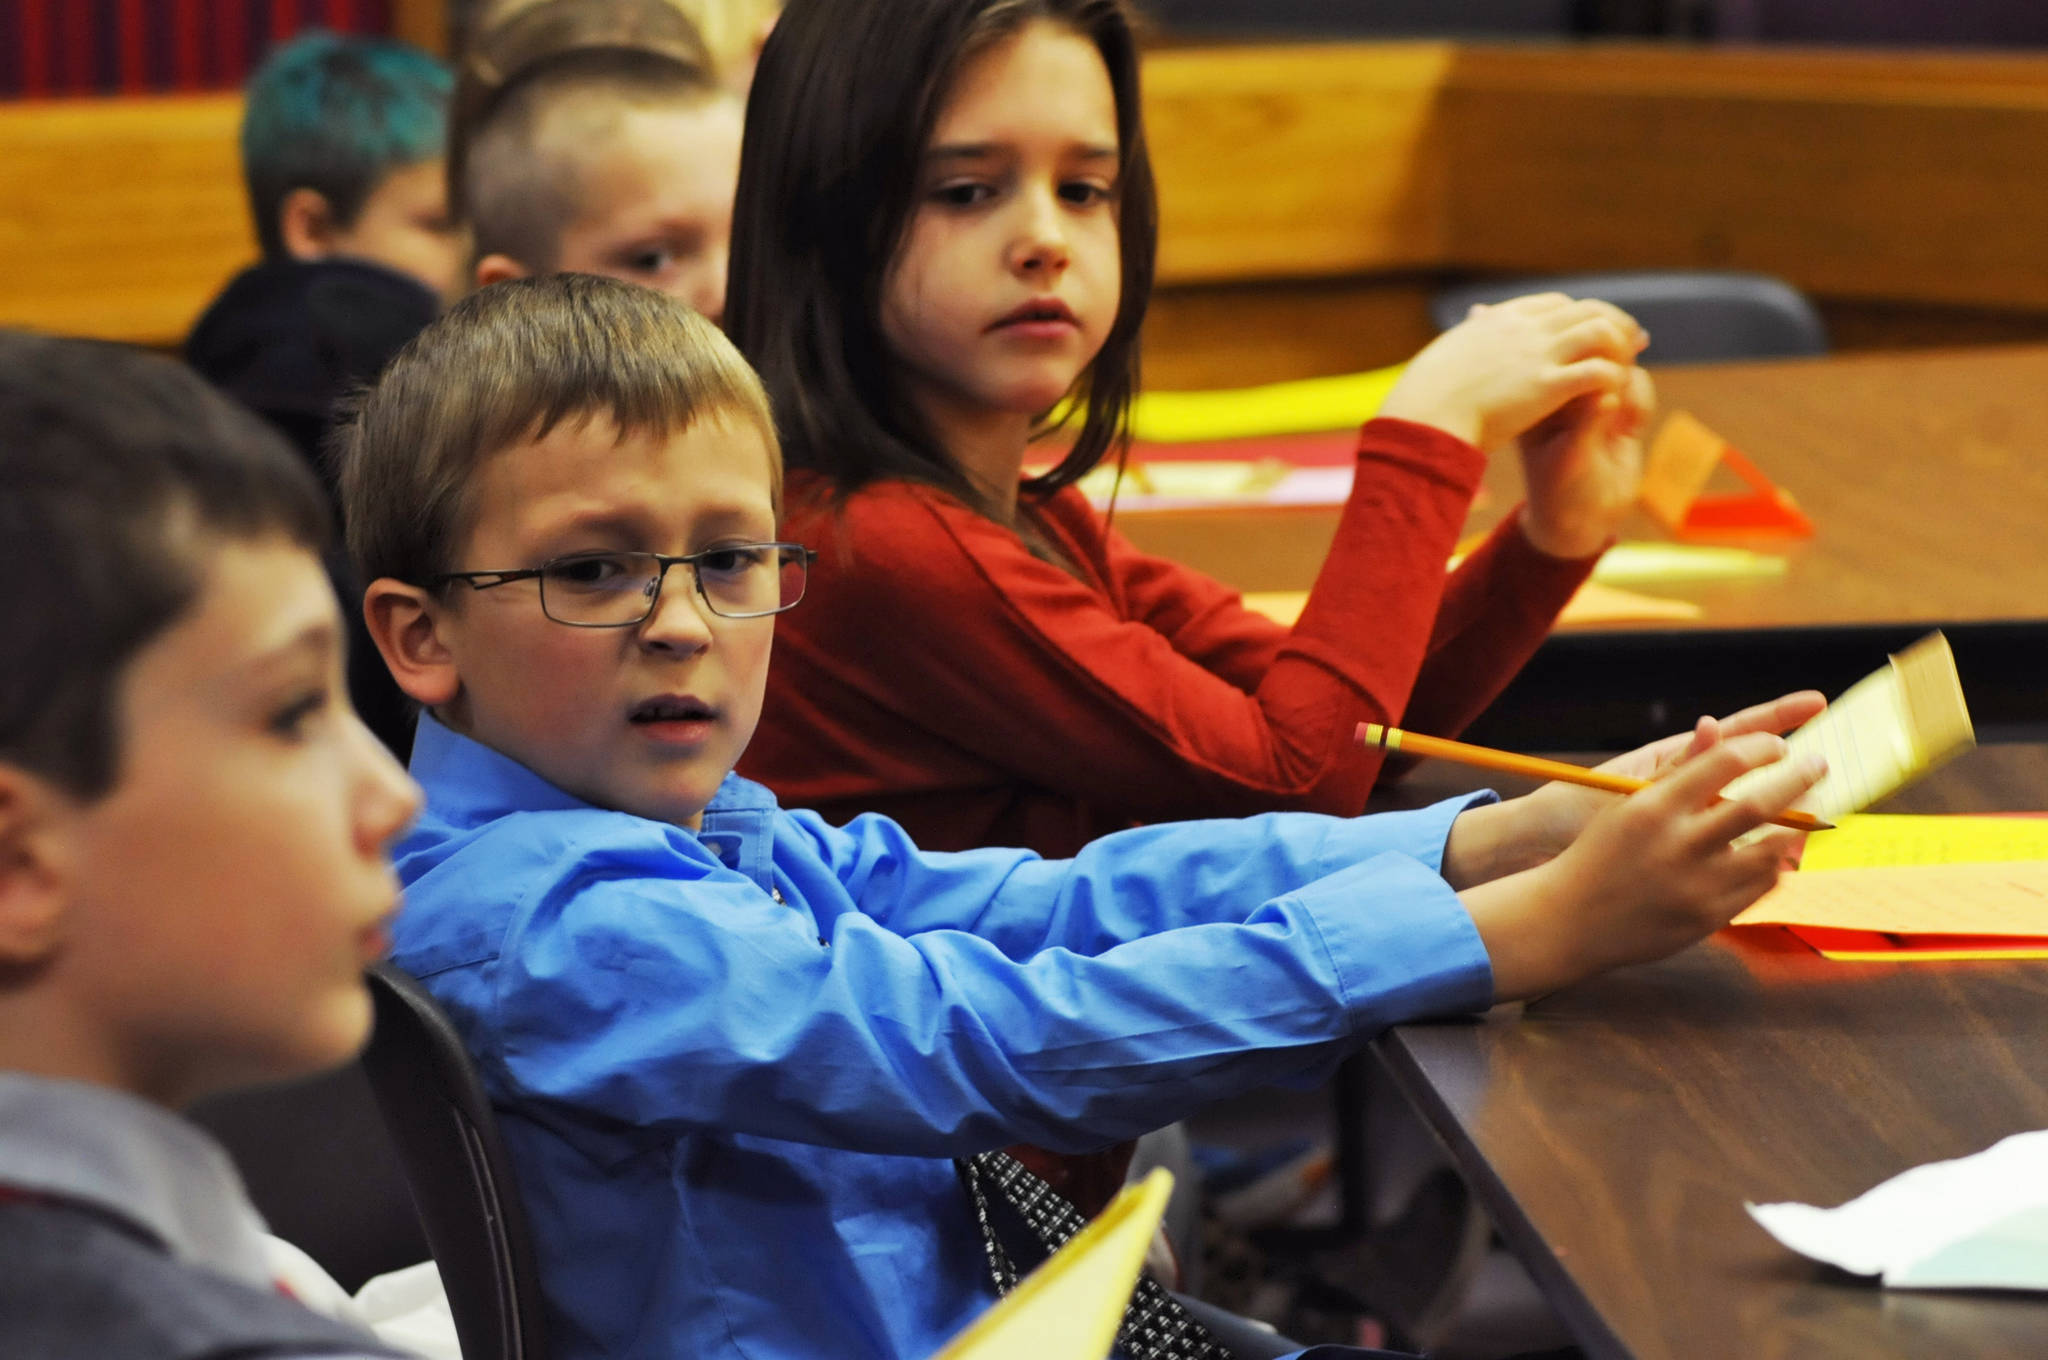 James Jensen, a second-grader at Kalifornsky Beach Elementary School, makes a face as one of his co-attorneys in the defense of “Arthur T. Grinch” asks a question during the class’s mock trial based on Dr. Seuss’s classic “How the Grinch Stole Christmas” on Thursday, Nov. 9, 2017 in Kenai, Alaska. The class has been studying civics and learning about the court process and put on a mock sentencing hearing, complete with witnesses and a jury composed of students’ parents and K-Beach Elementary Principal Nate Crabtree. (Photo by Elizabeth Earl/Peninsula Clarion)